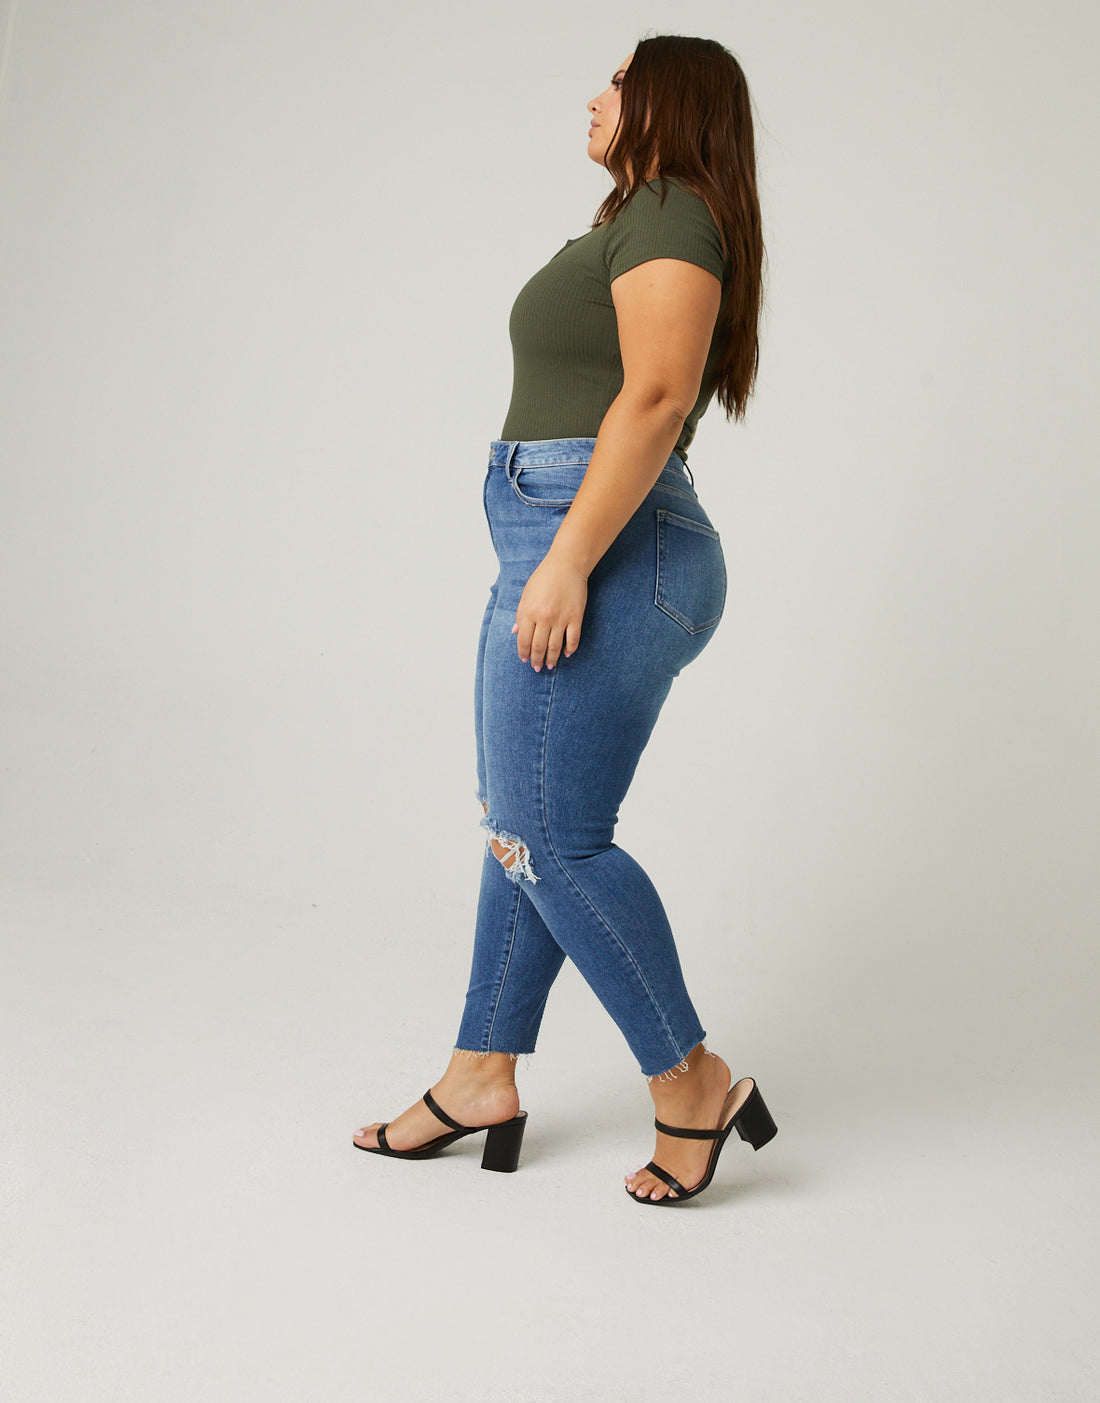 Curve Distressed Knee Mom Jeans Plus Size Bottoms -2020AVE